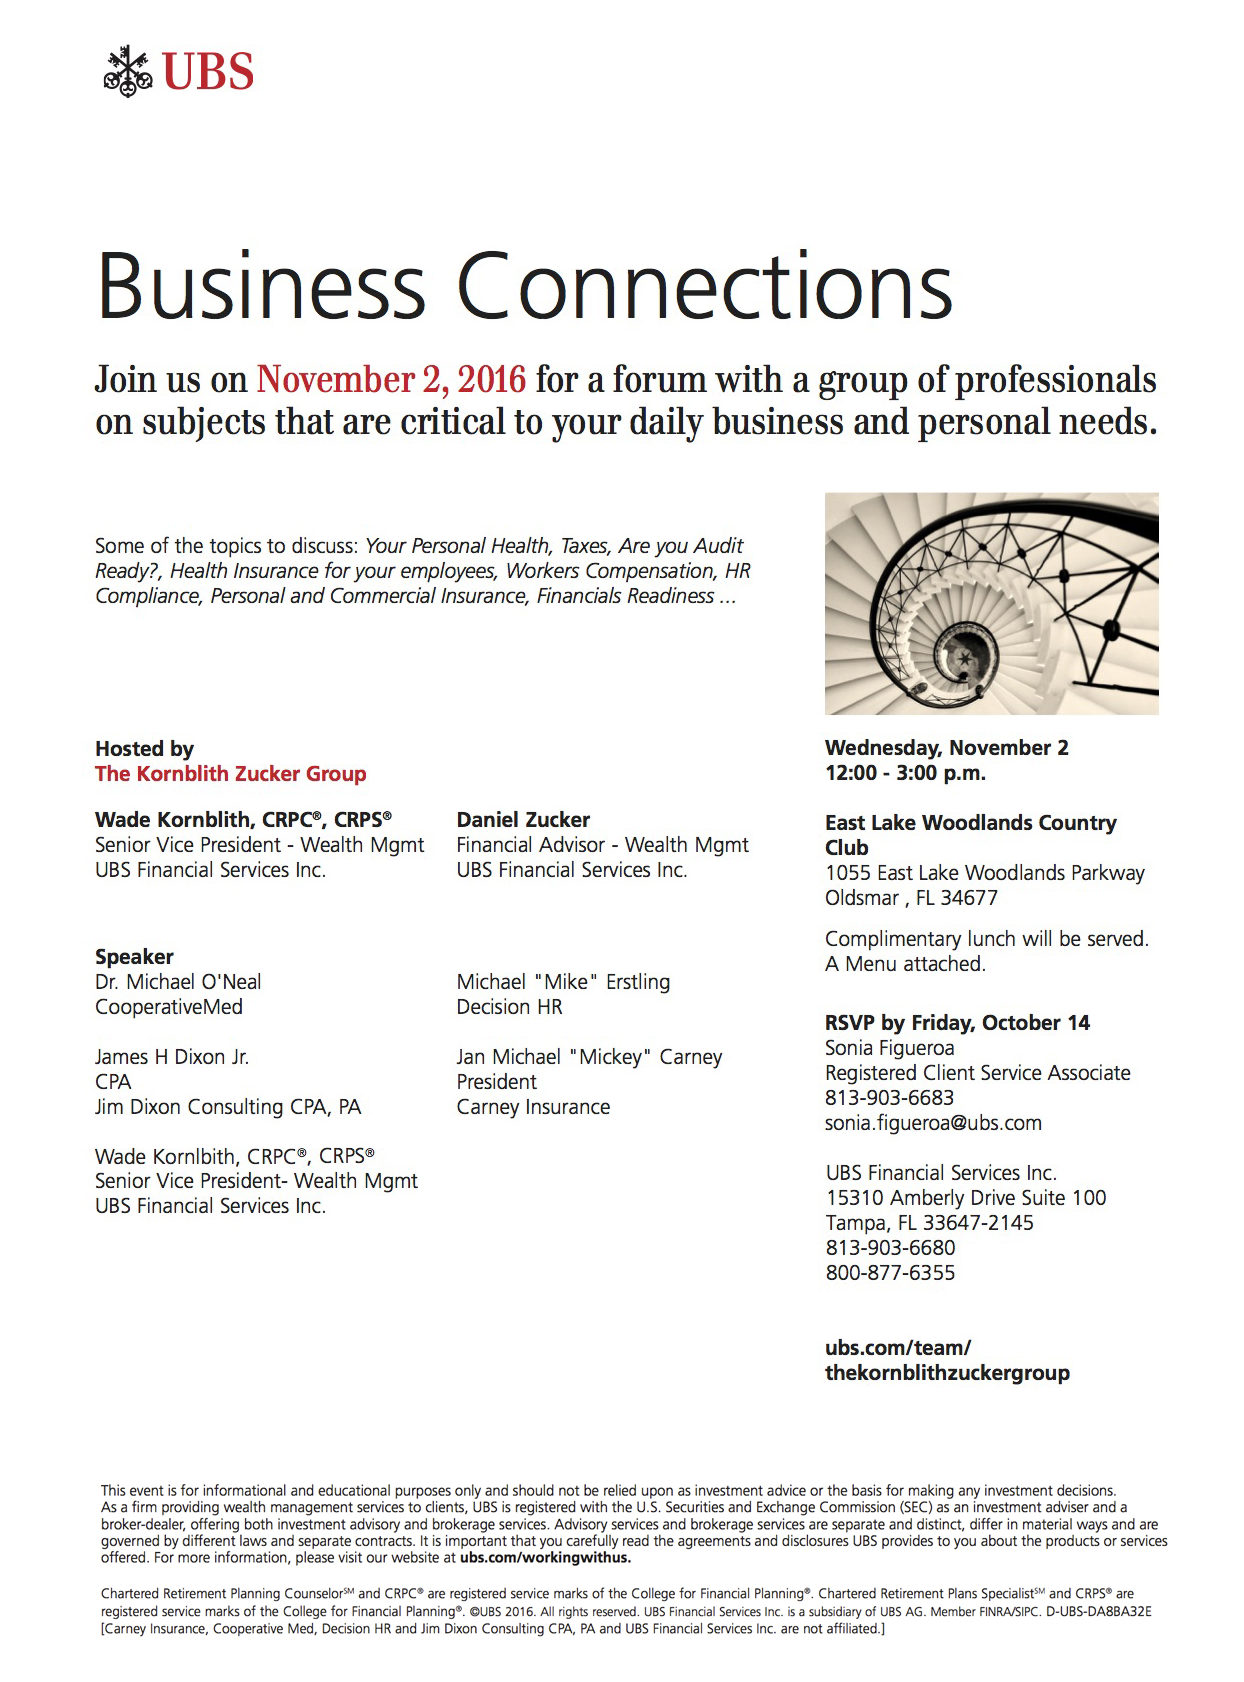 business-connections-event-invite-copy